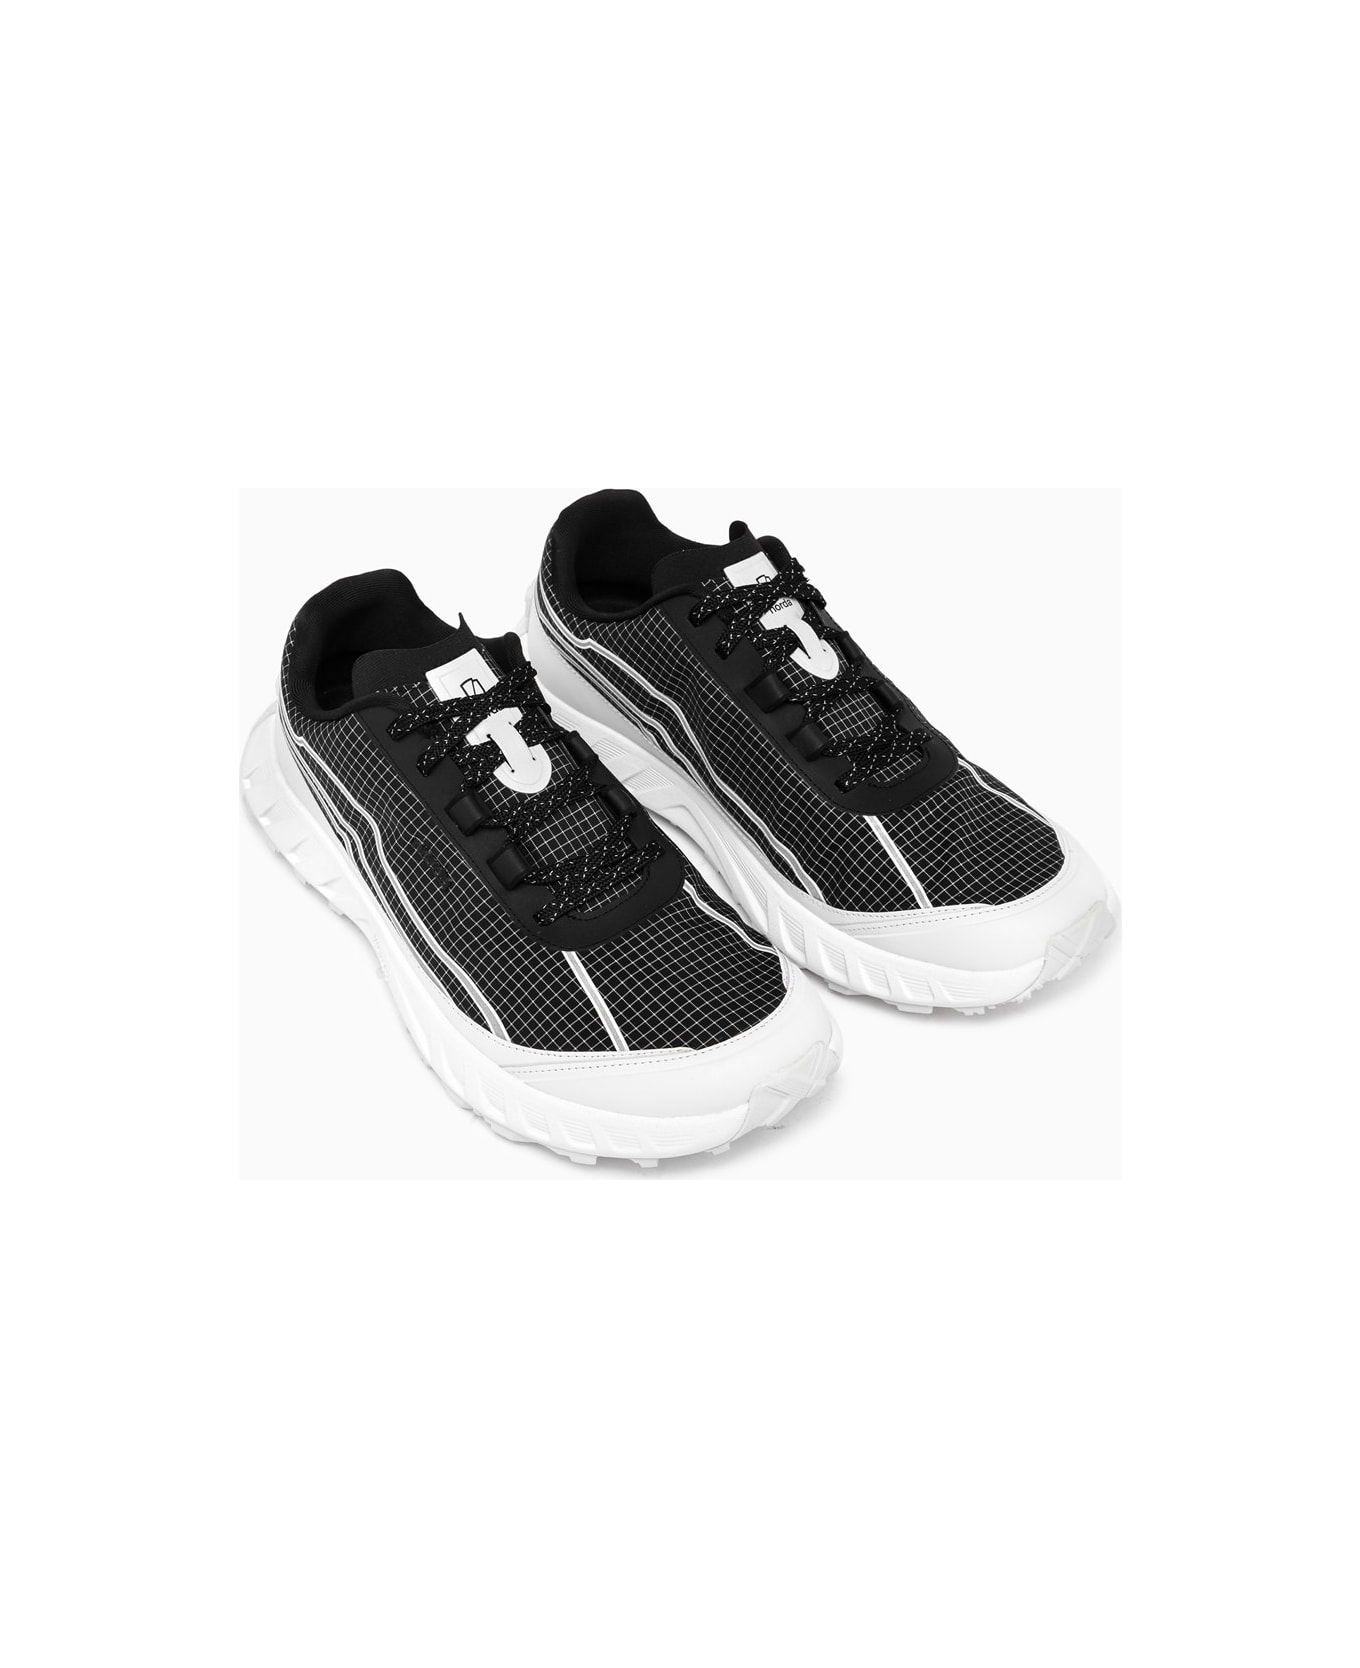 Norda The 002 Blk/ripstop 1019 Sneakers - BLACK/WHITE